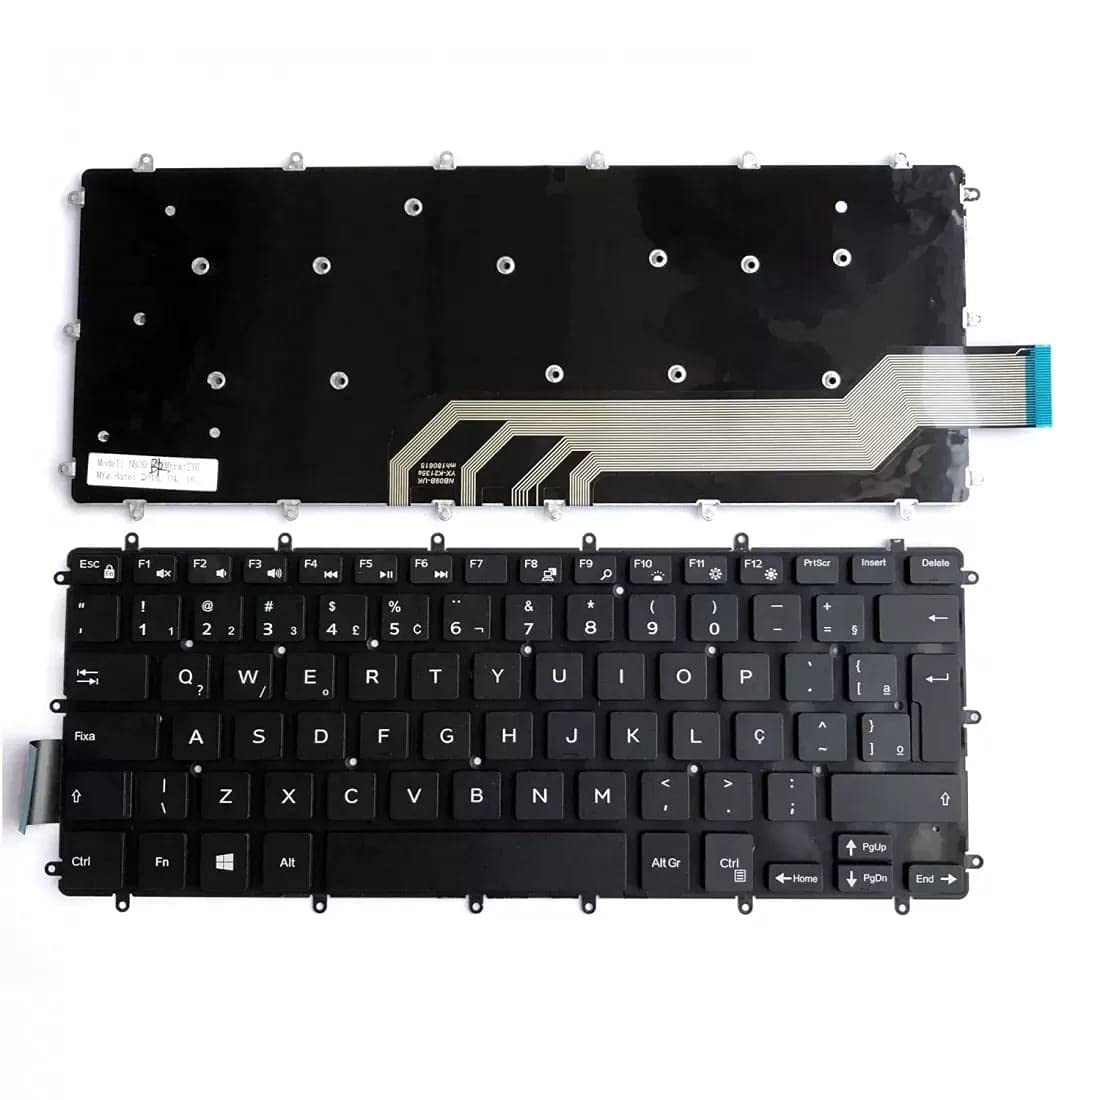 WISTAR Laptop Keyboard for DELL inspiron 5568 5578 5368 5378 7368 7378 7466 13-5378